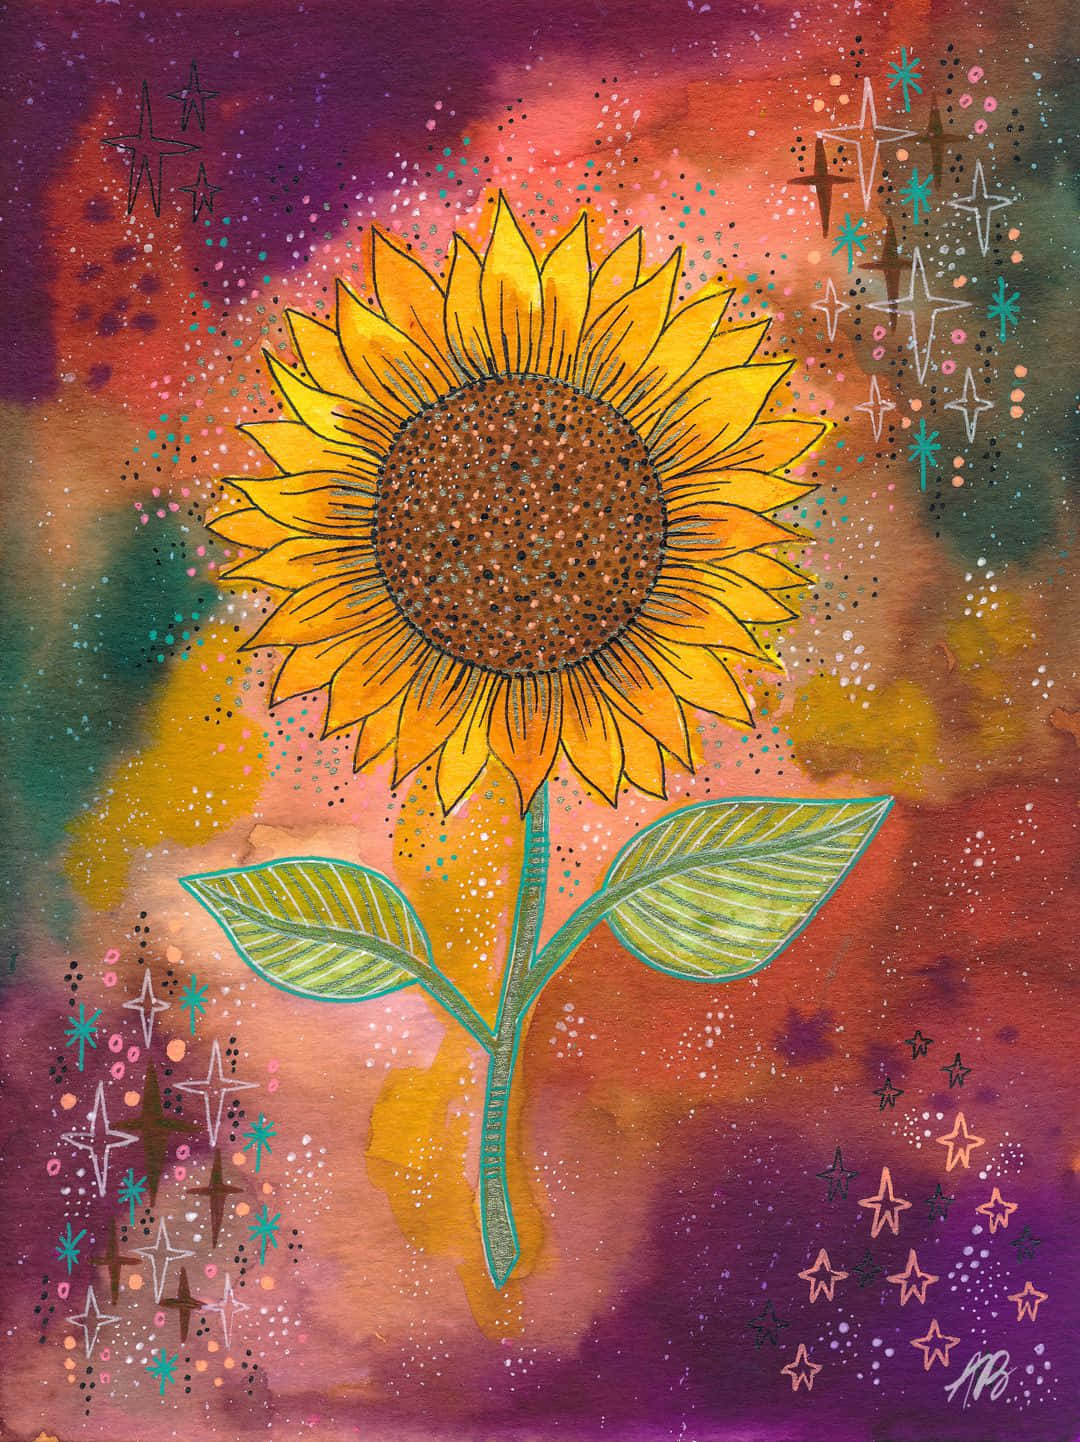 A Painting Of A Sunflower With Stars On It Wallpaper